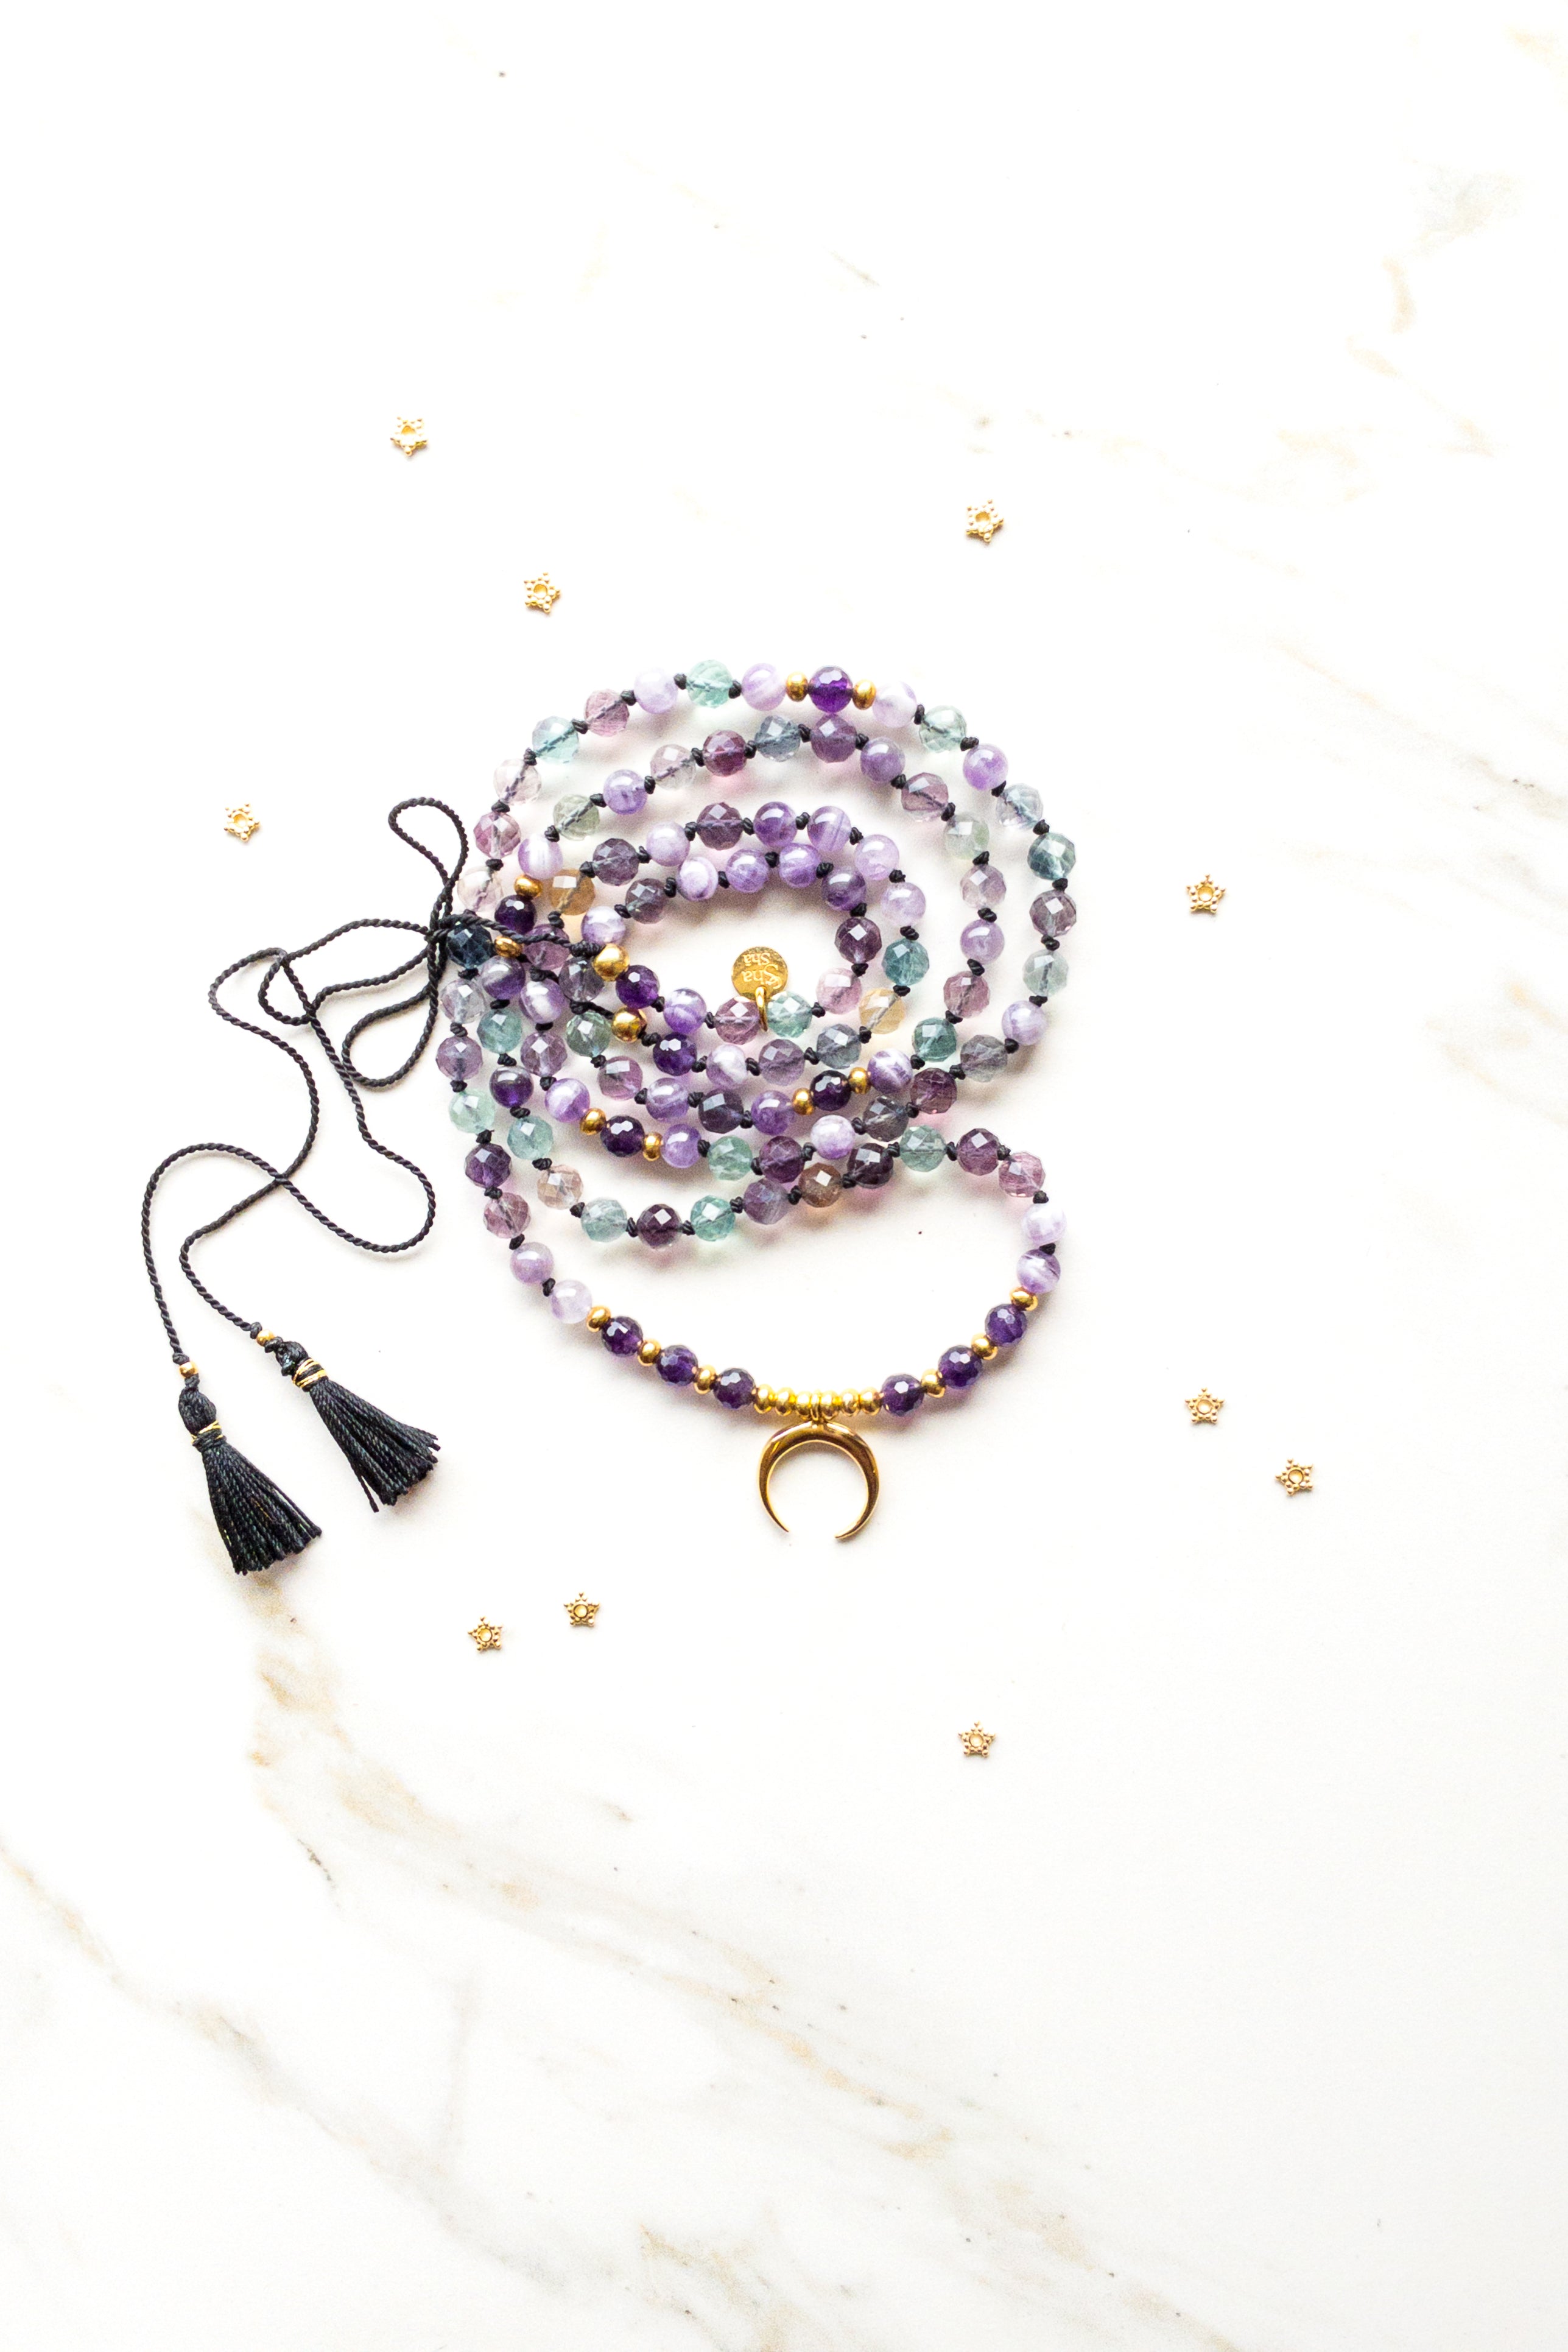 The Starry Serenity Mala Necklace - Fluorite & Amethyst - Indradhanush Collection